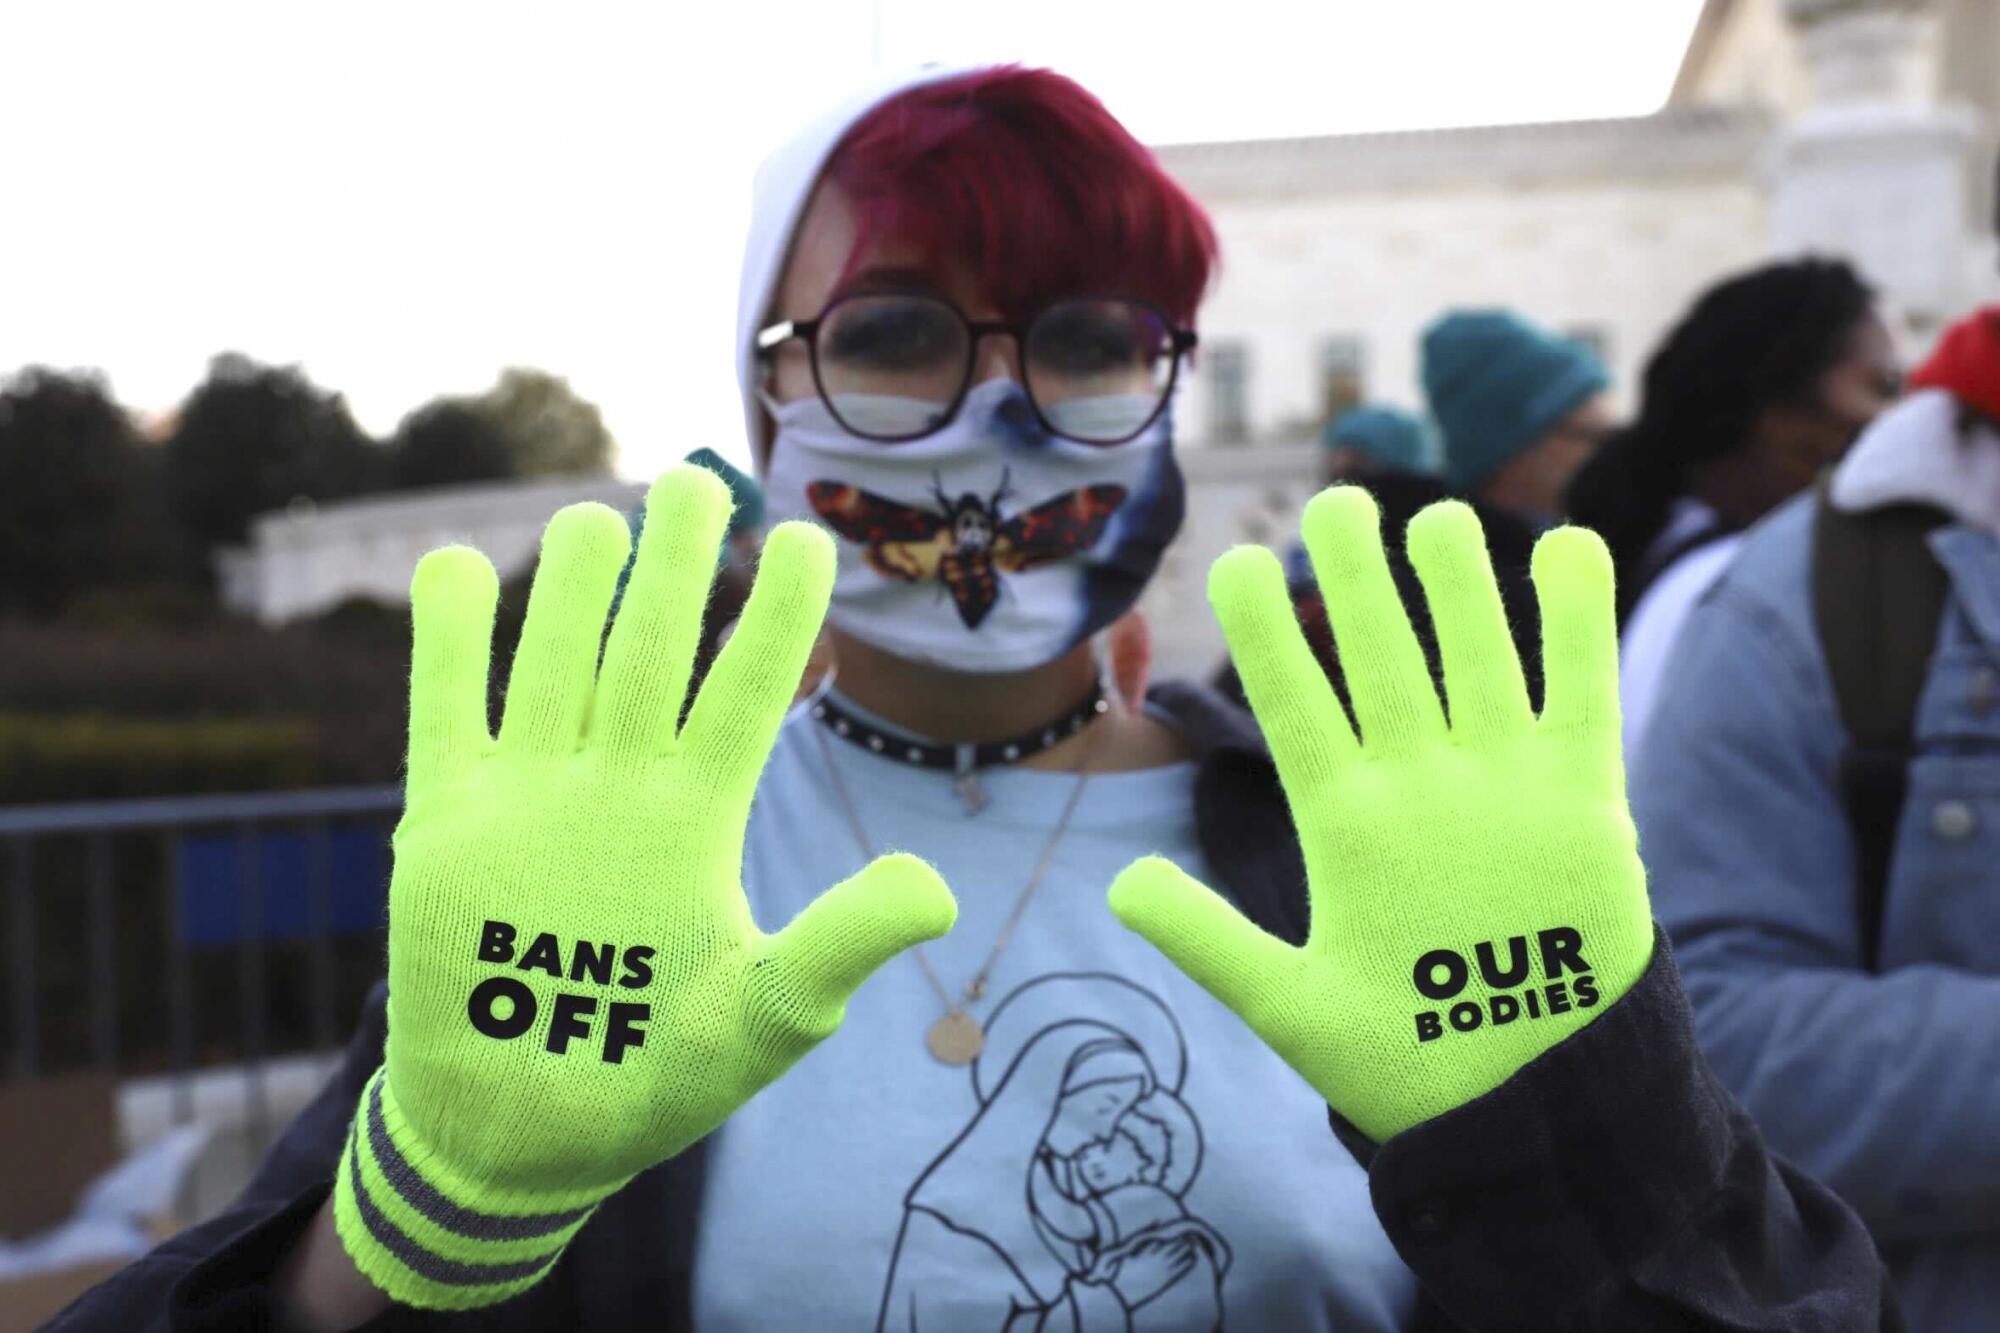 Jo Luttazi shows green gloves with "Bans Off Our Bodies" printed on them.